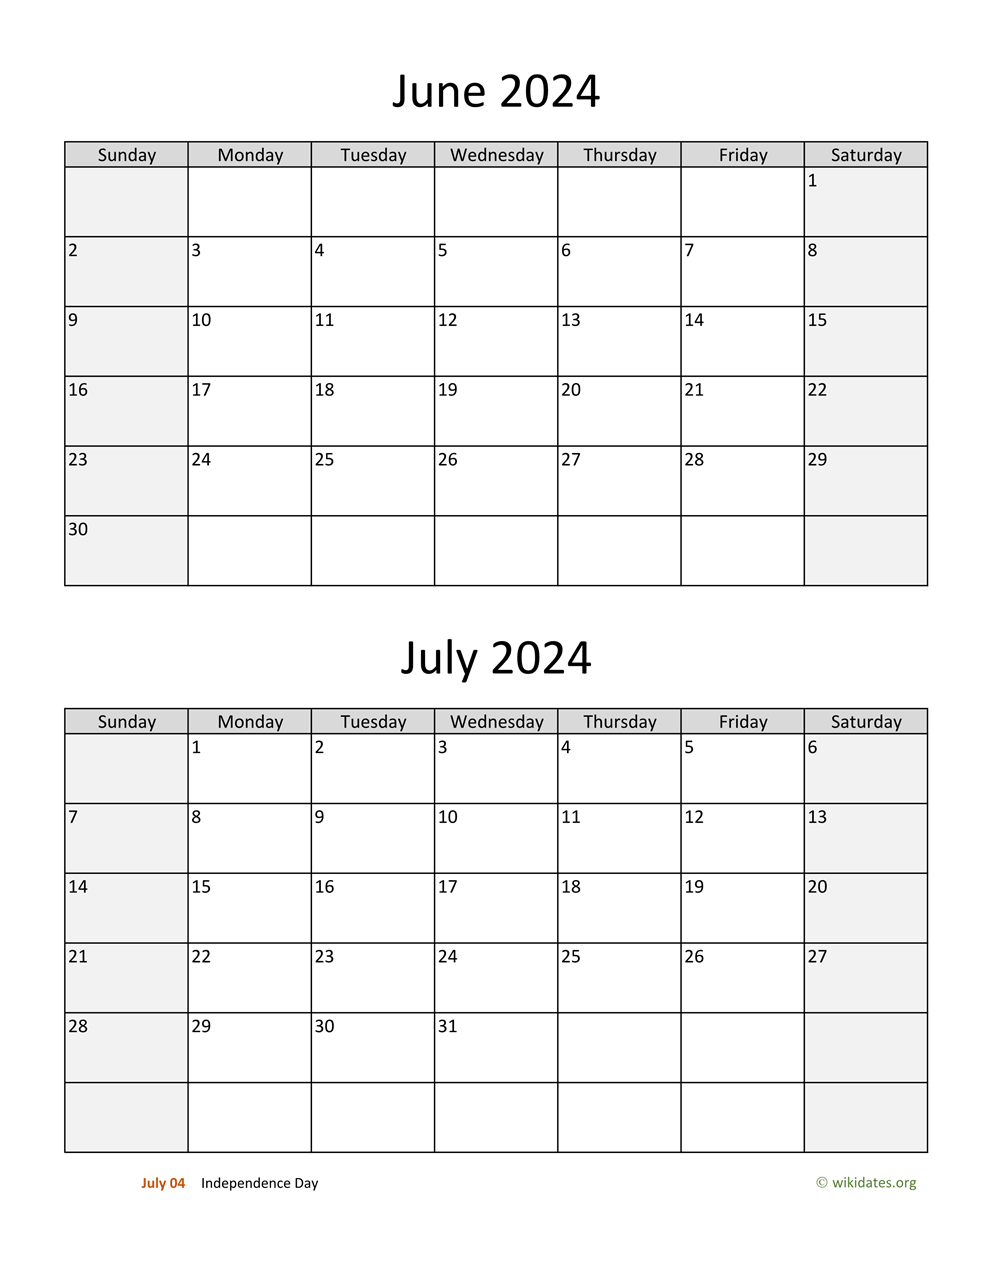 June And July 2024 Calendar | Wikidates for Printable Calendar 2024 June And July